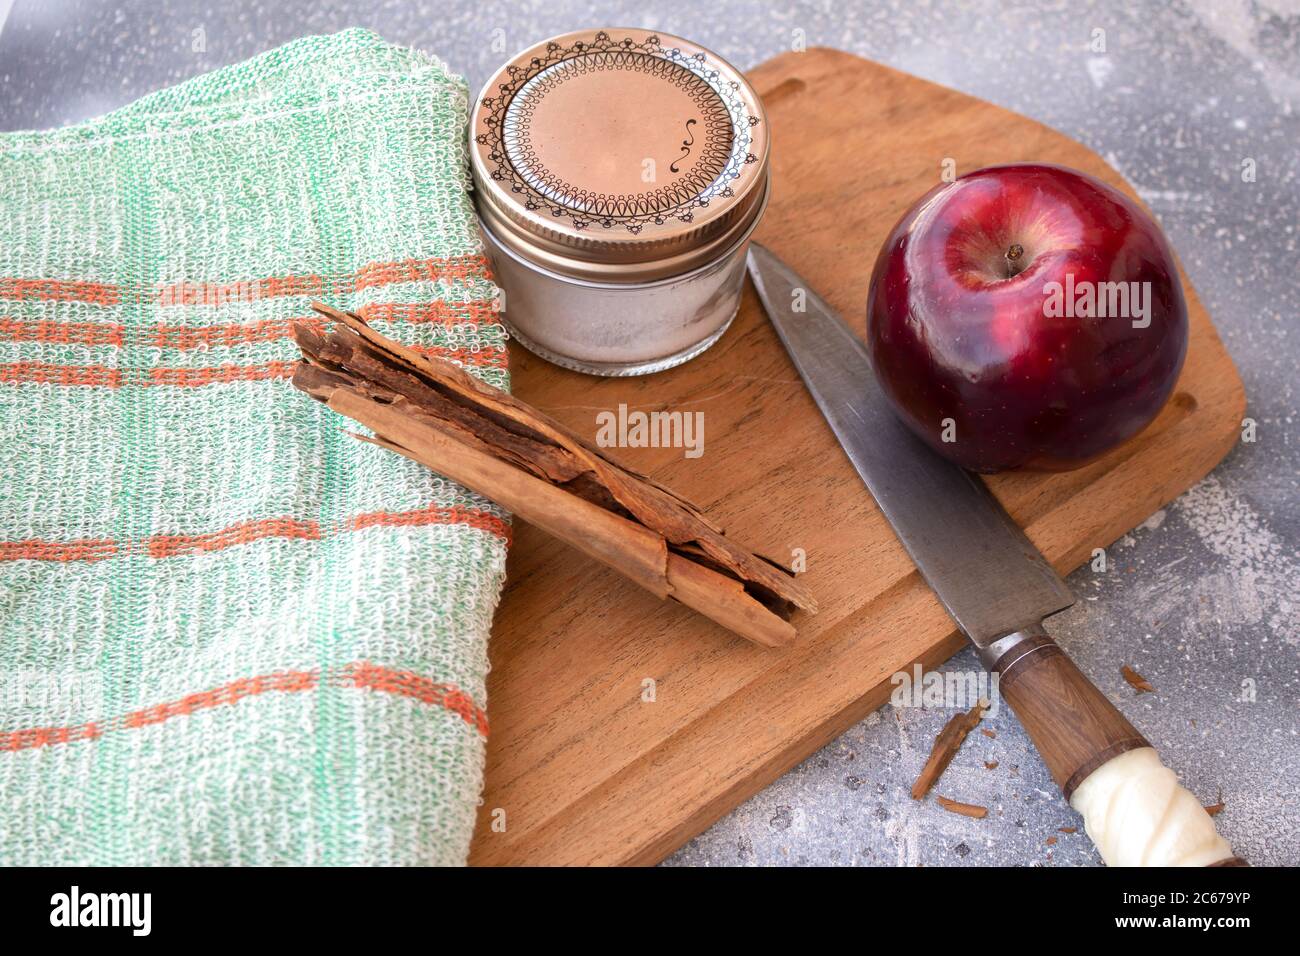 Red apple, knife, sugar and cinnamon on Wooden table Stock Photo